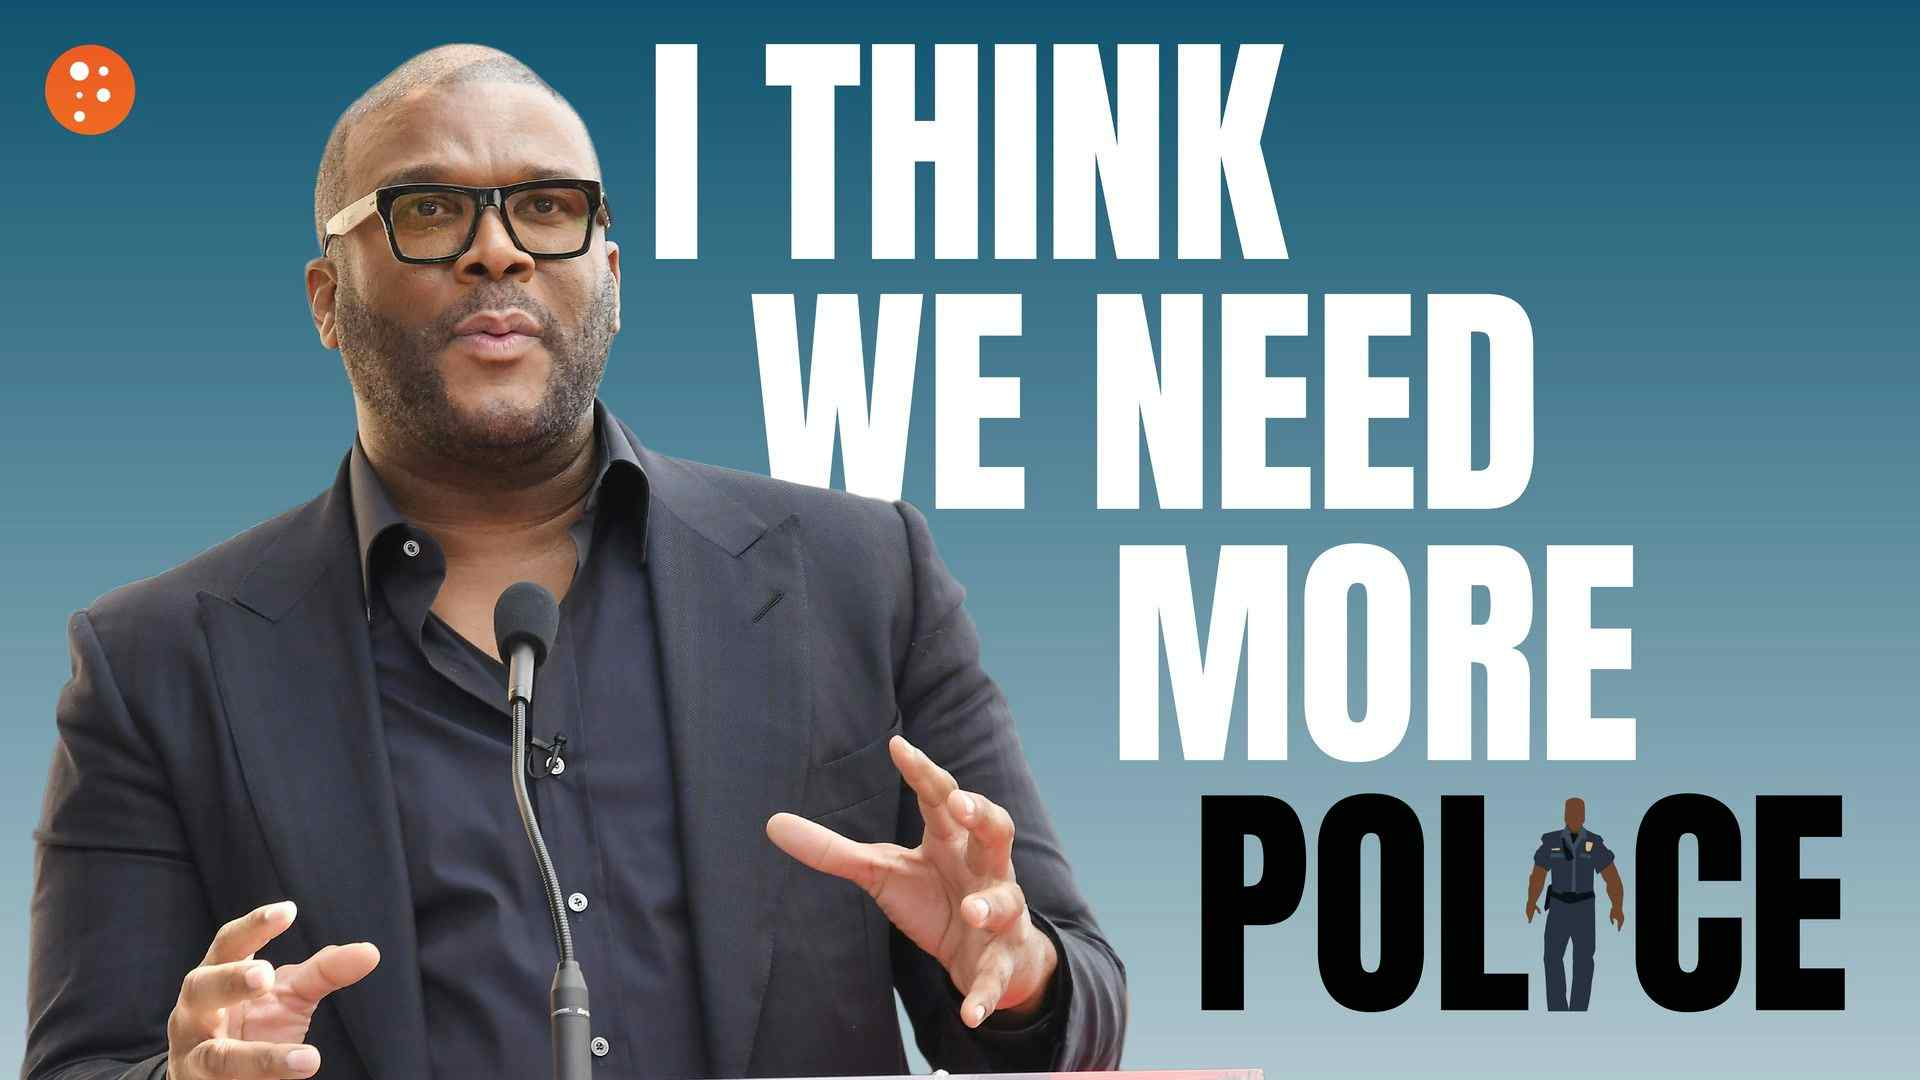 Tyler Perry: "I think we need more police"